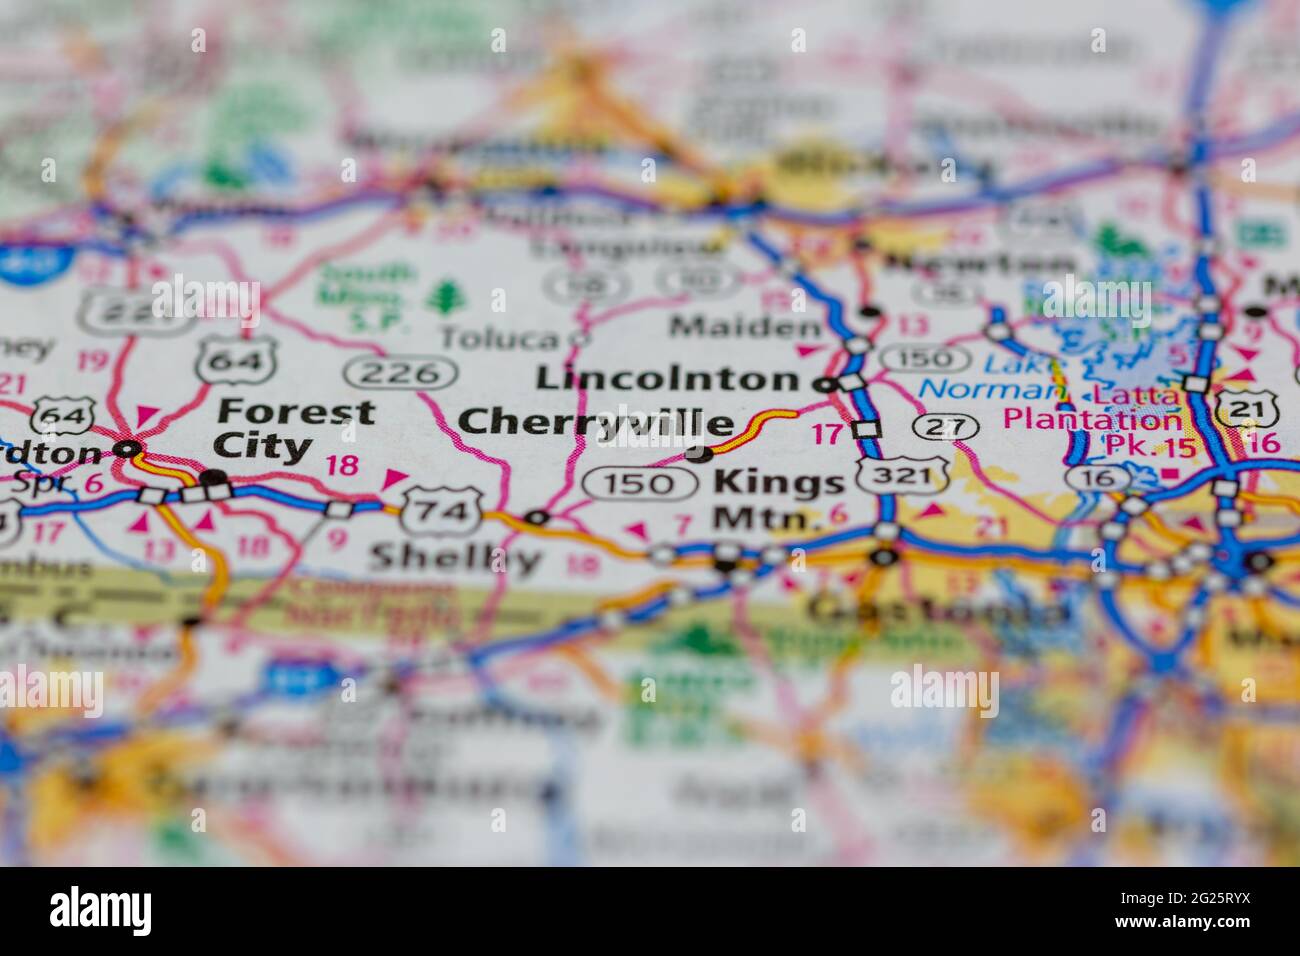 Cherryville North Carolina USA shown on a Road map or Geography map Stock Photo